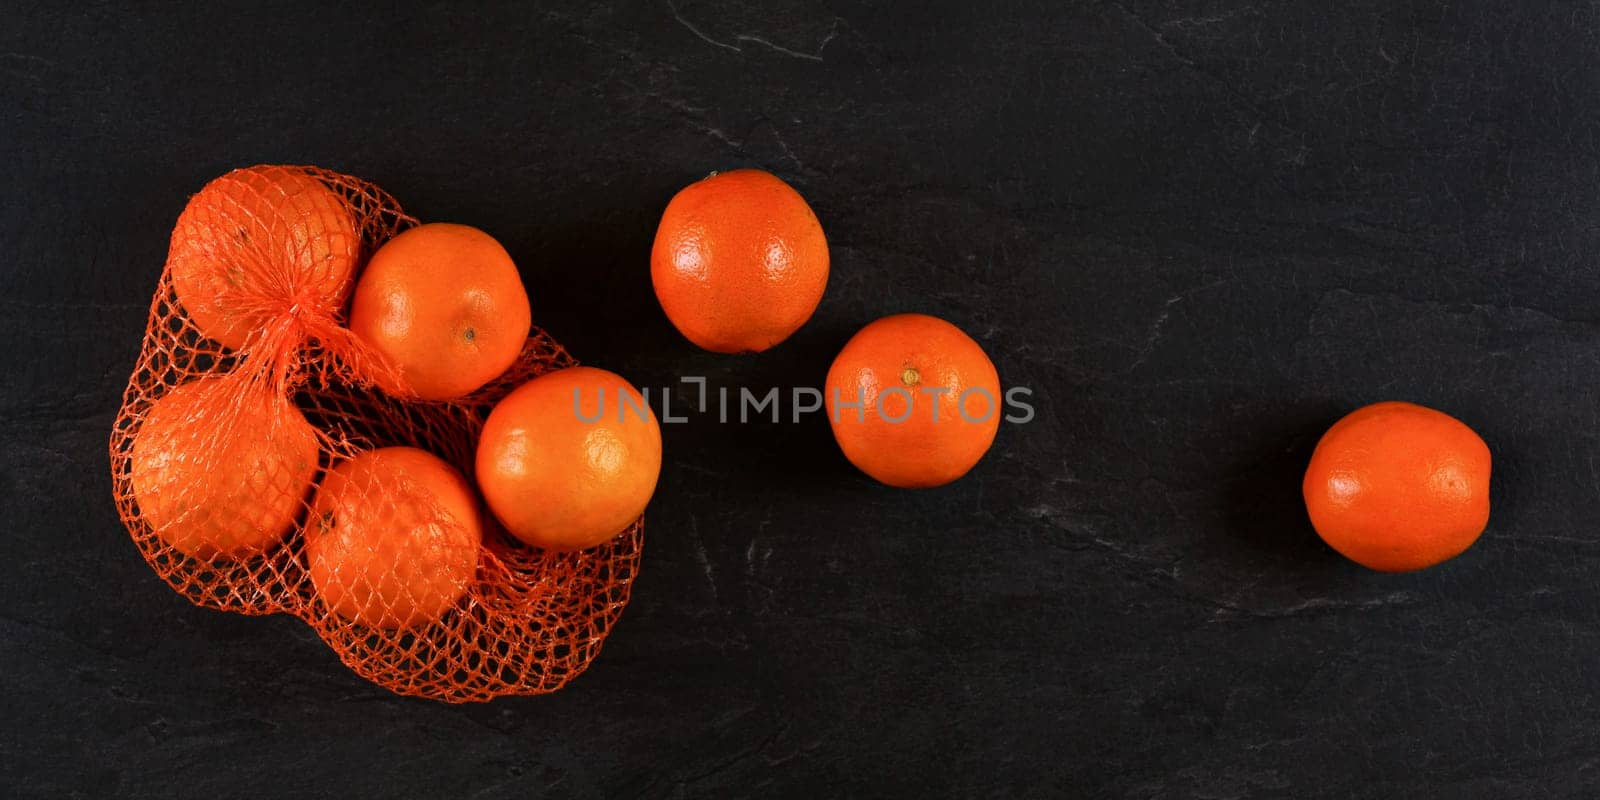 Oranges in plastic red net from supermarket, some scattered on black stone like board, photo from above